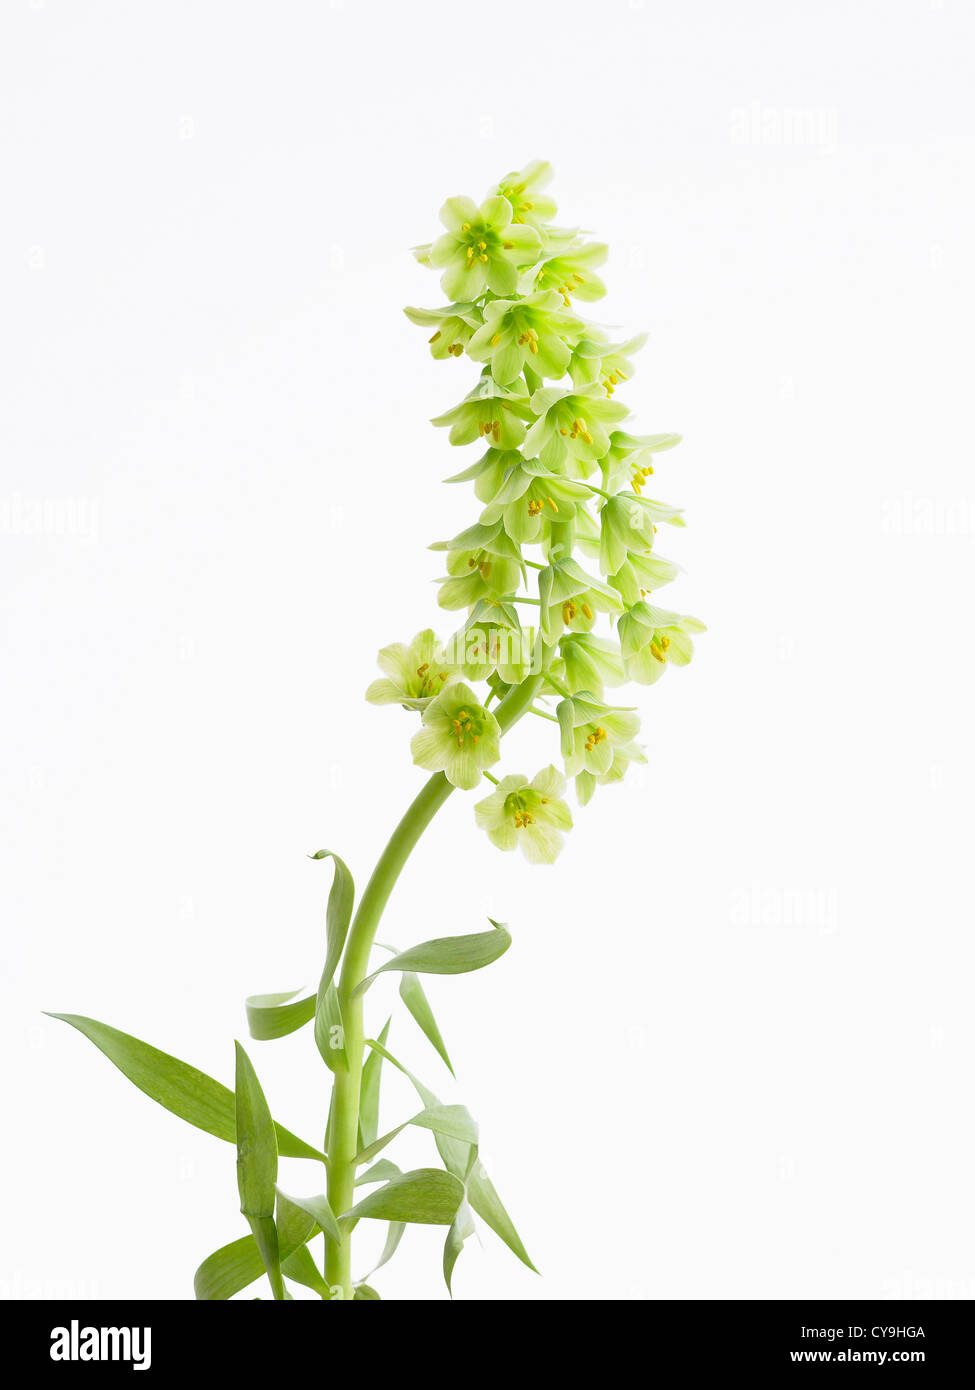 Fritillaria persica 'Ivory Bells', Fritillary. Flowering single stem with white bell shaped flowers against a white background. Stock Photo